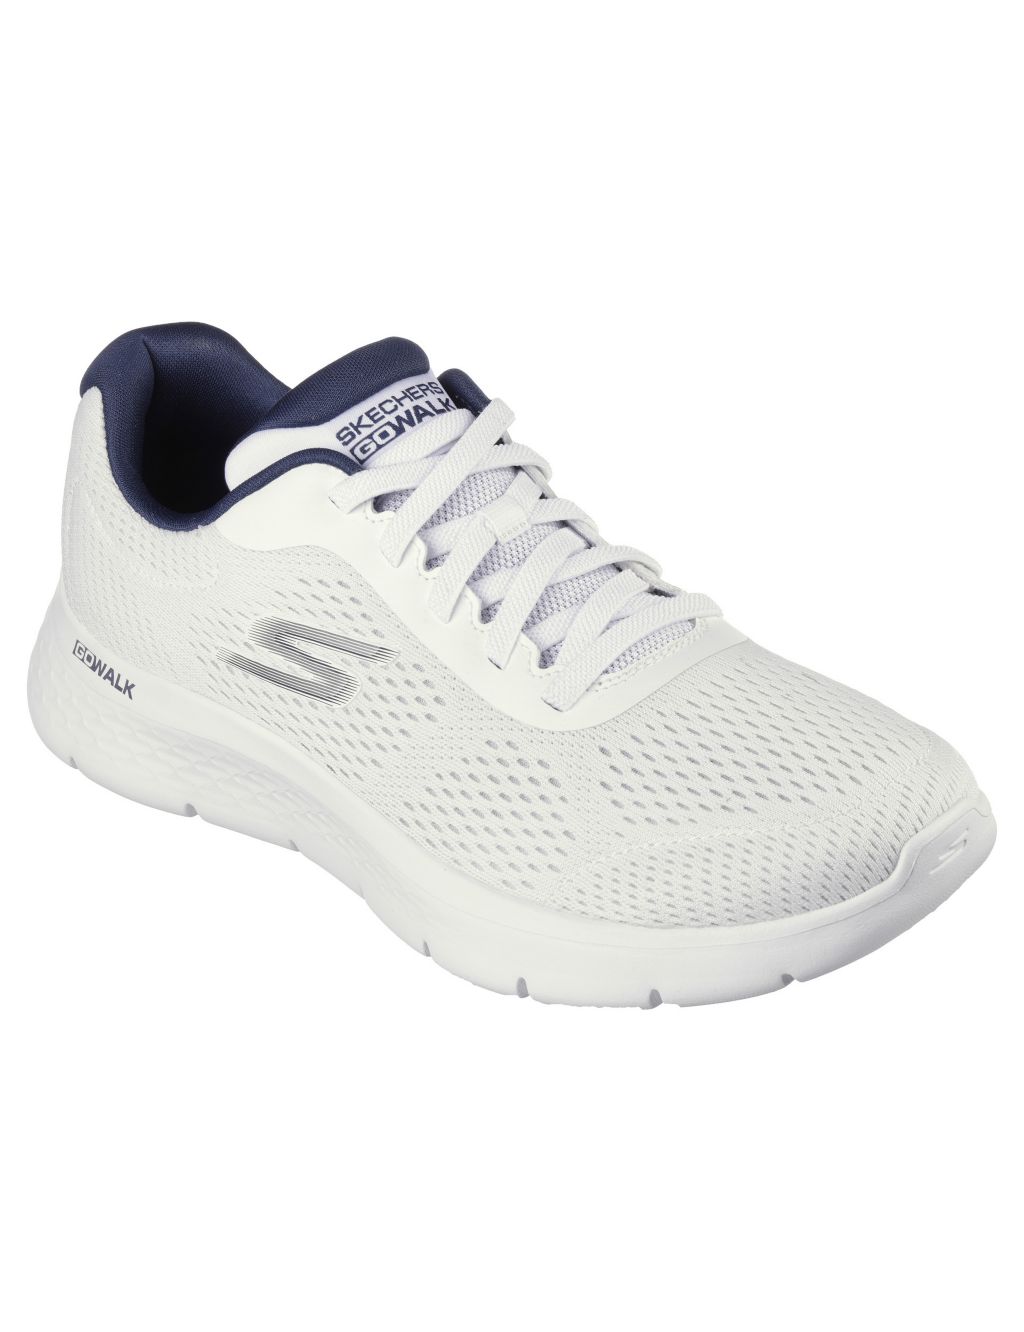 GOwalk Flex Remark Lace Up Trainers 1 of 5